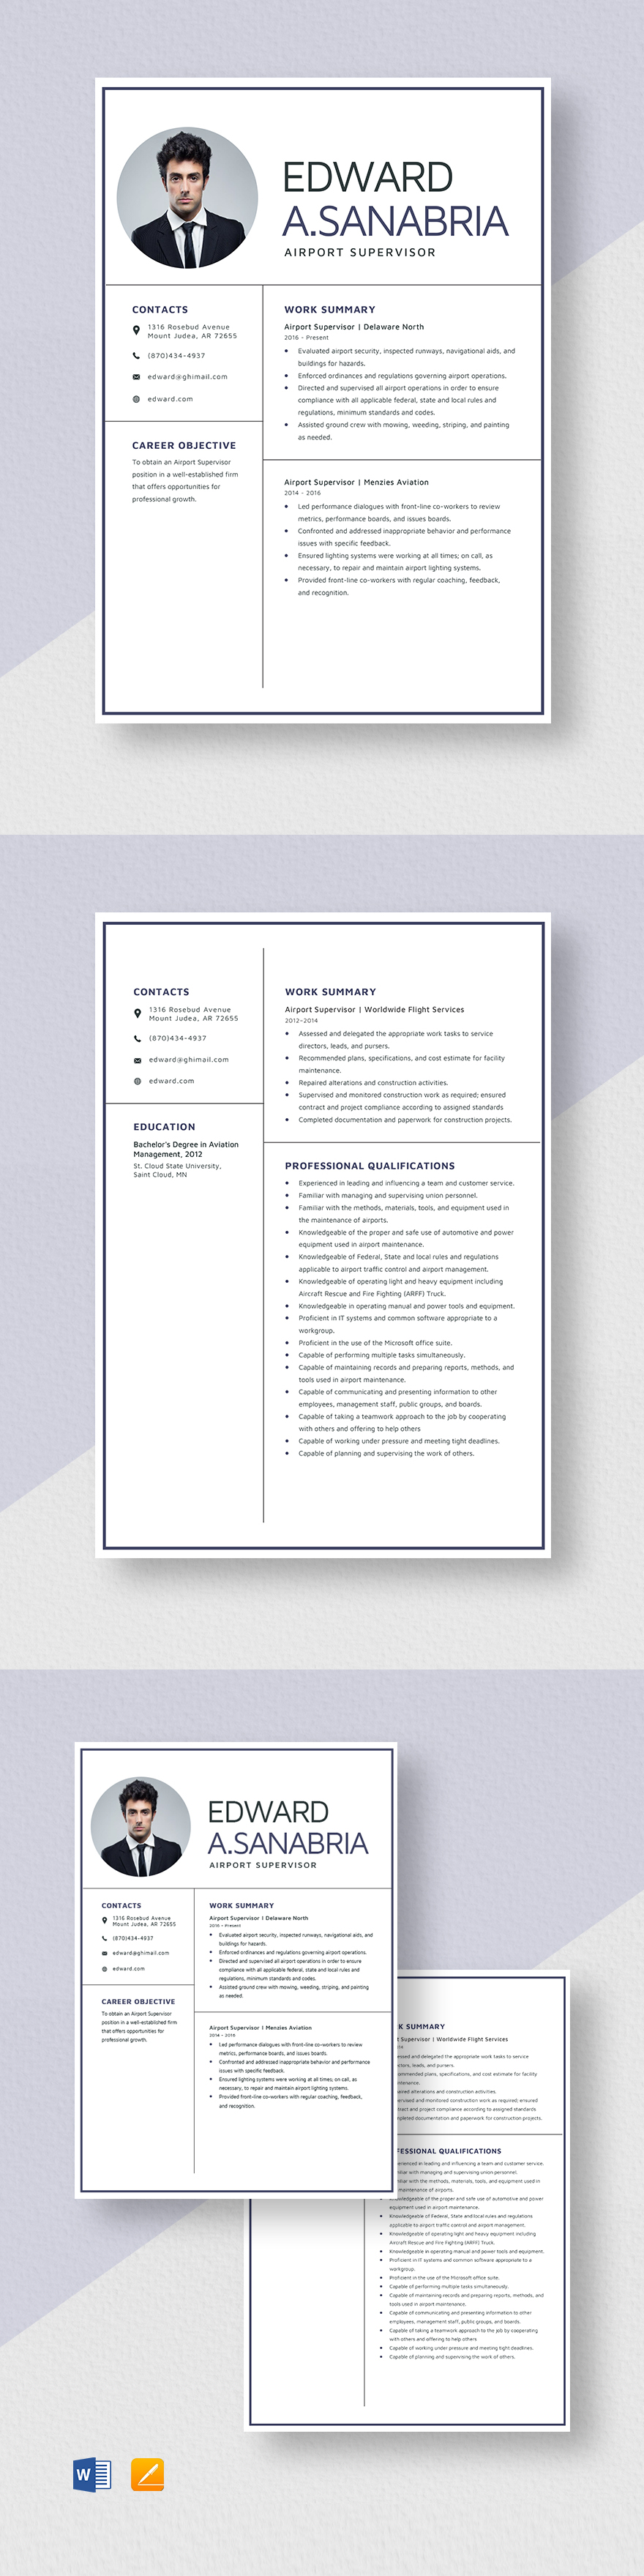 Airport Supervisor Resume Template